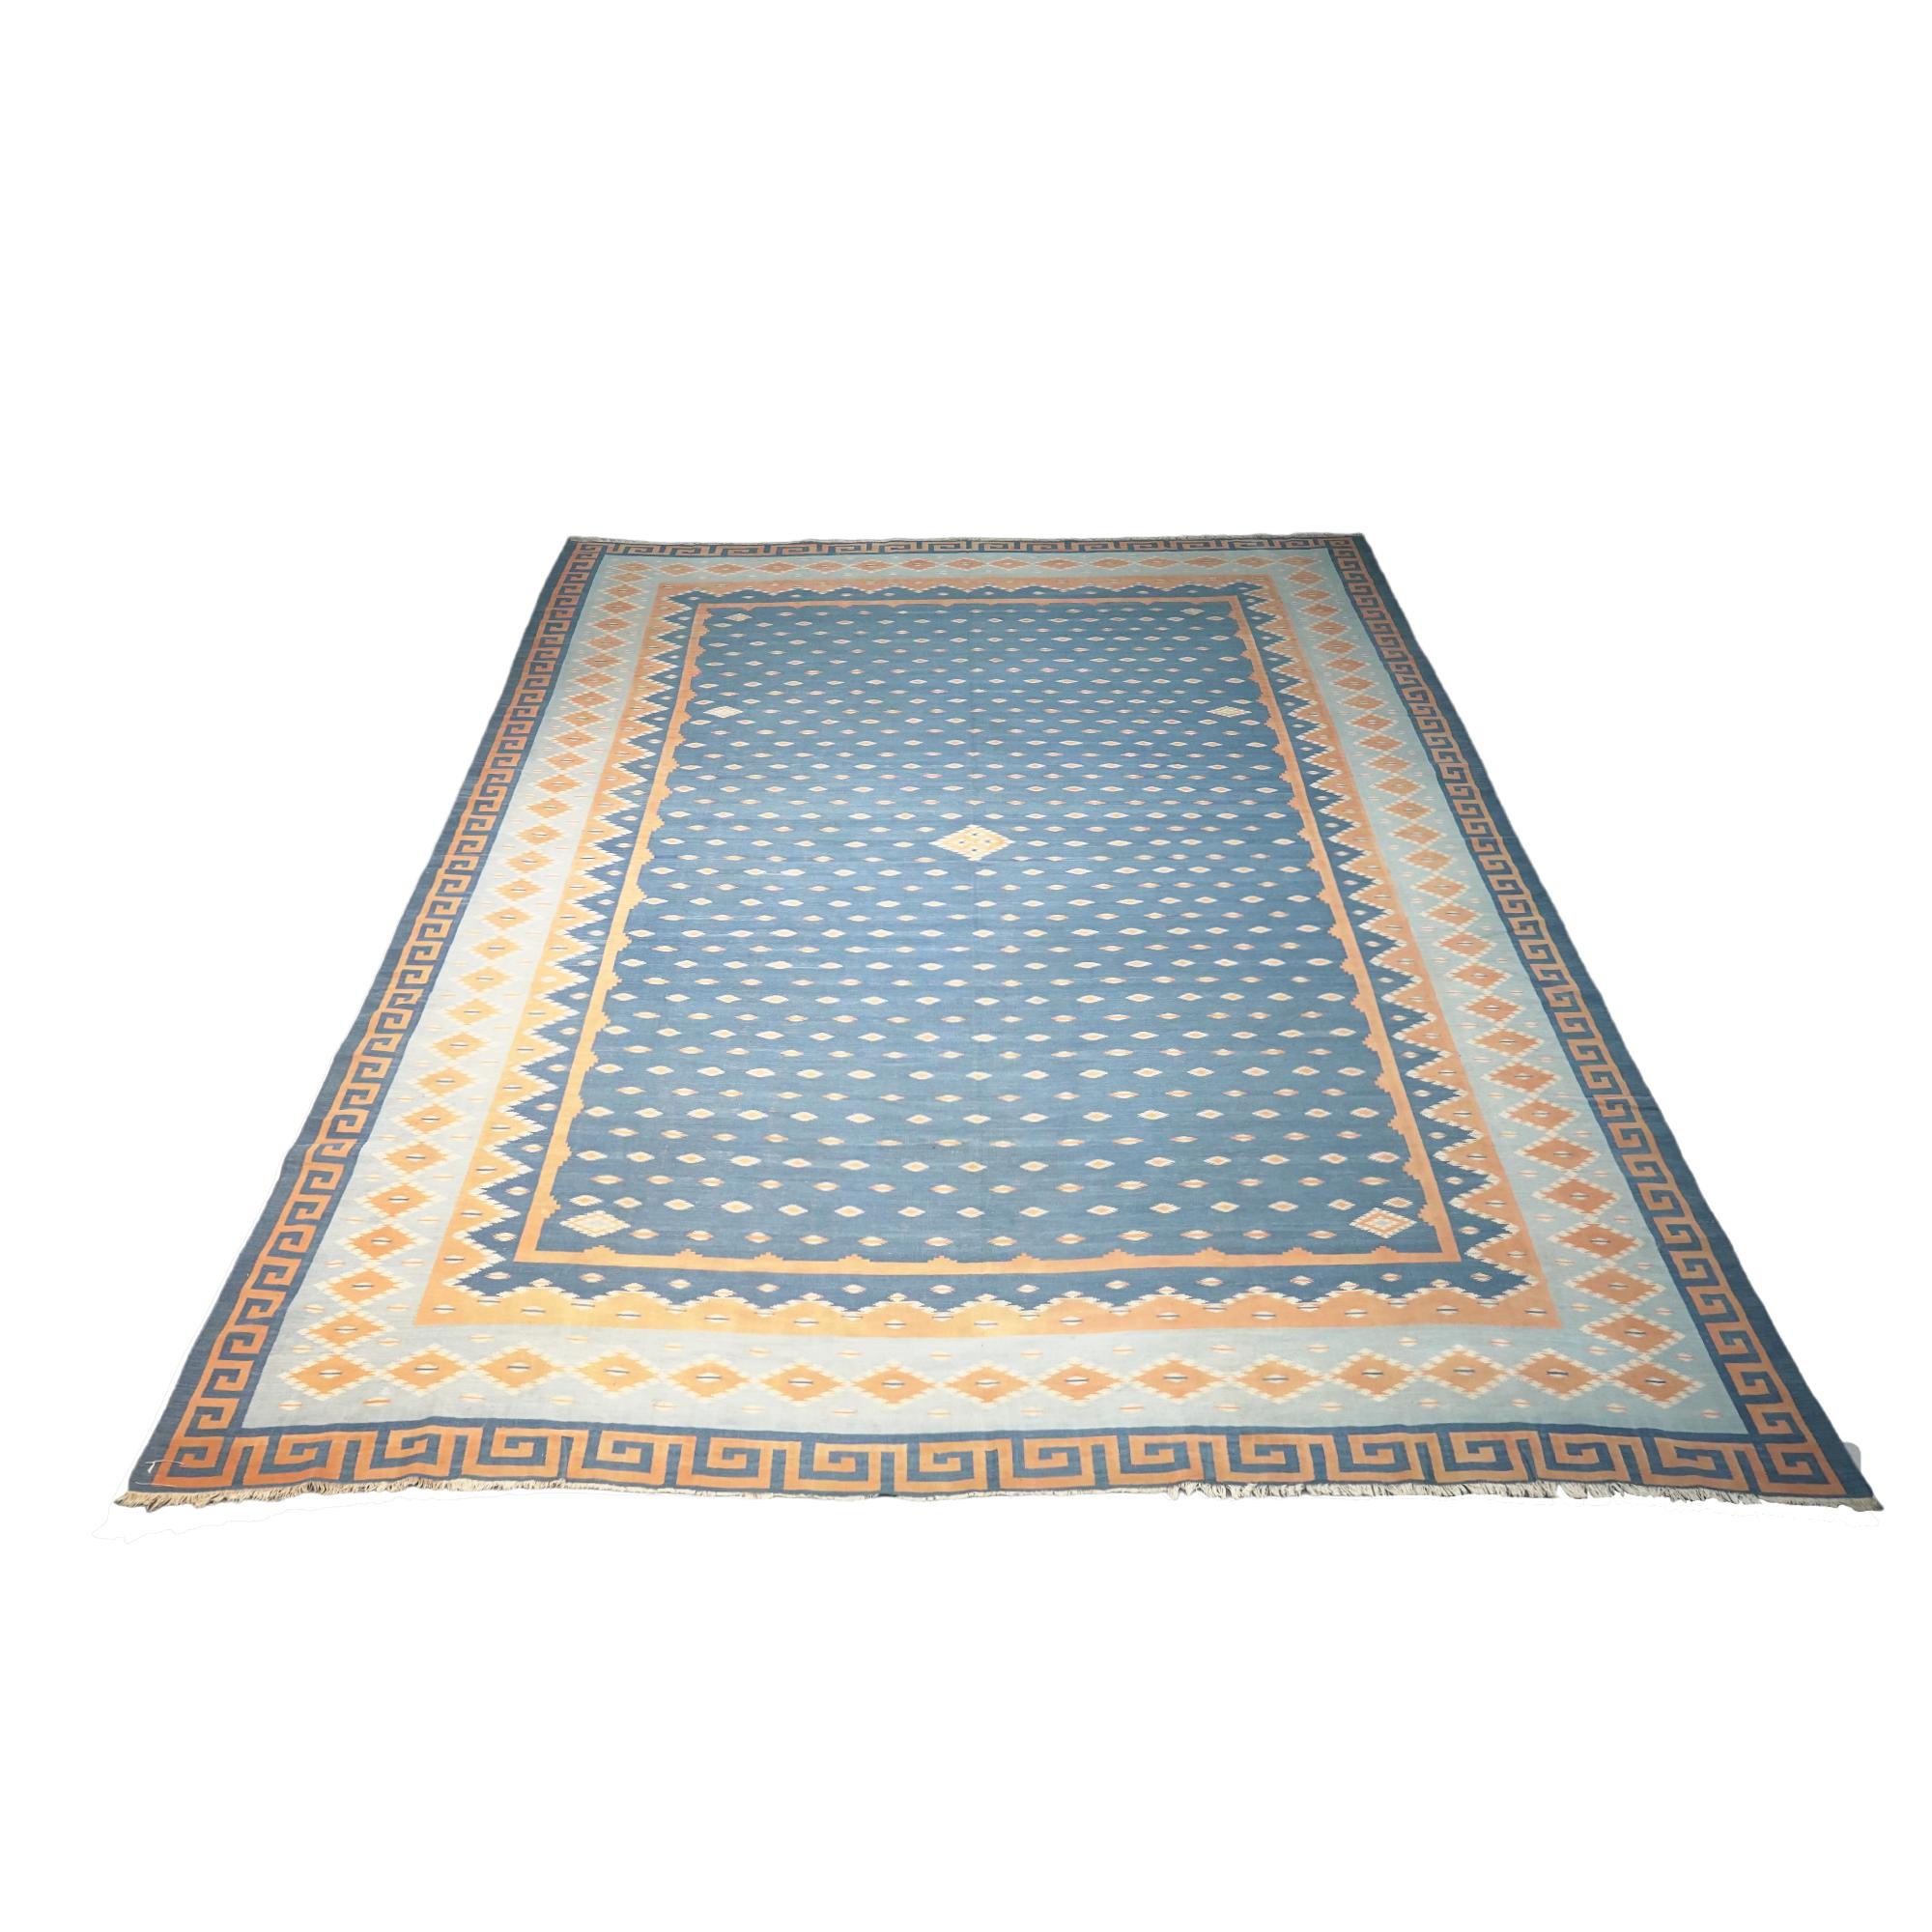 Kilim Vintage Dhurrie Rug in Blue, with Geometric Patterns For Sale